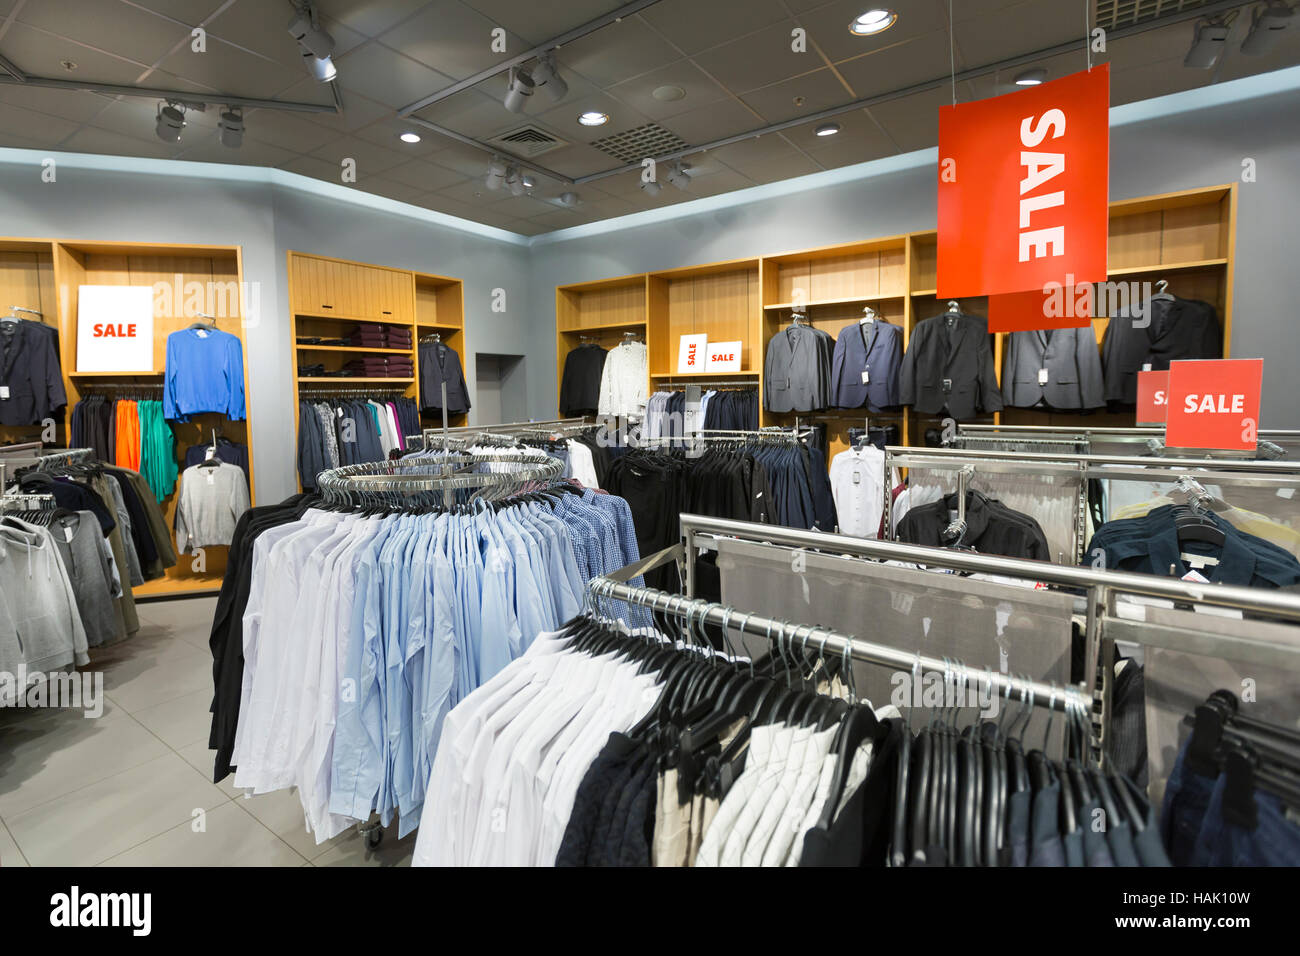 Clothing store interior design High Resolution Stock Photography and ...